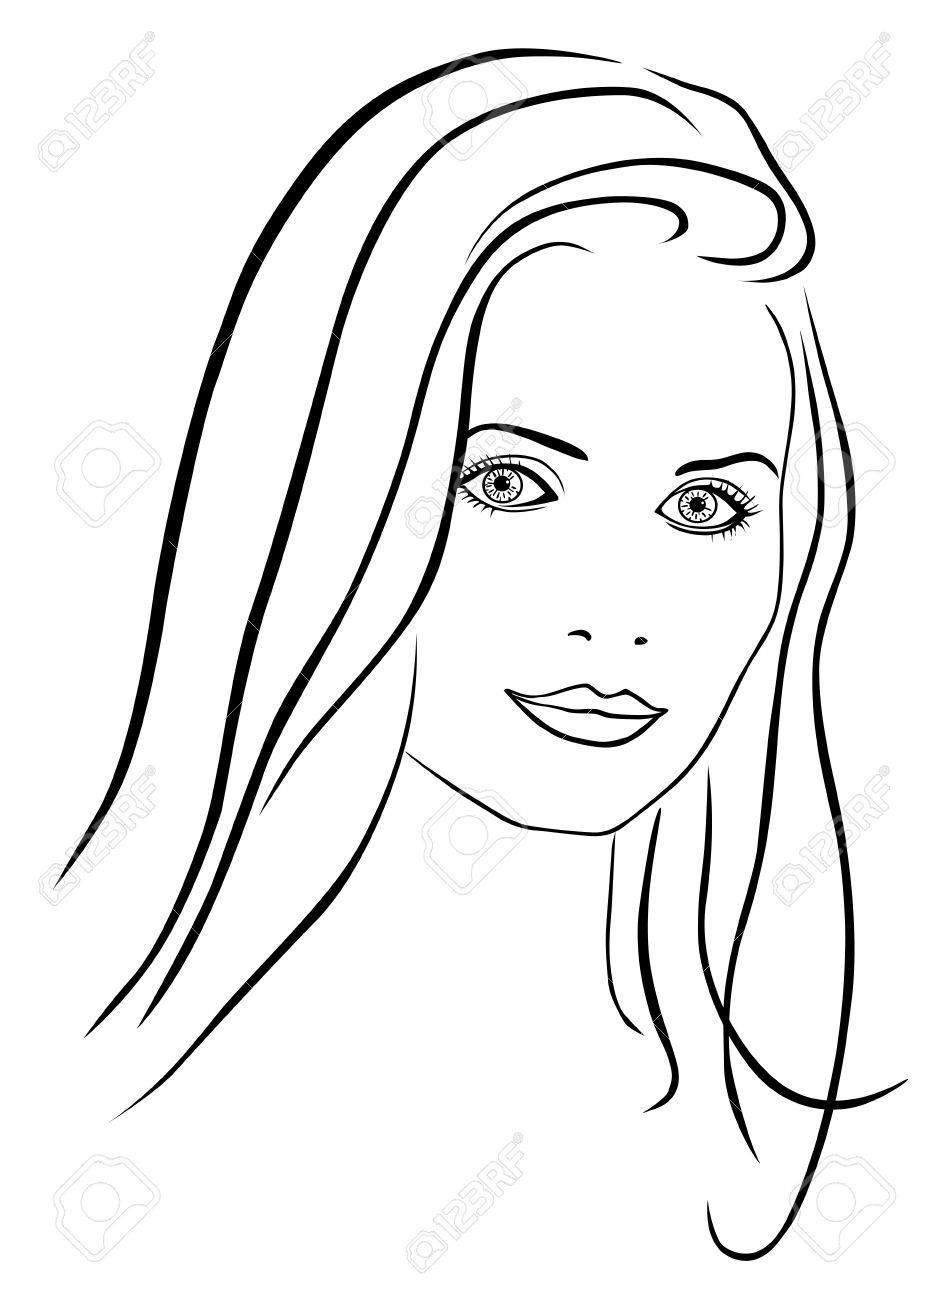 Human Face Outline Drawing at GetDrawings Free download